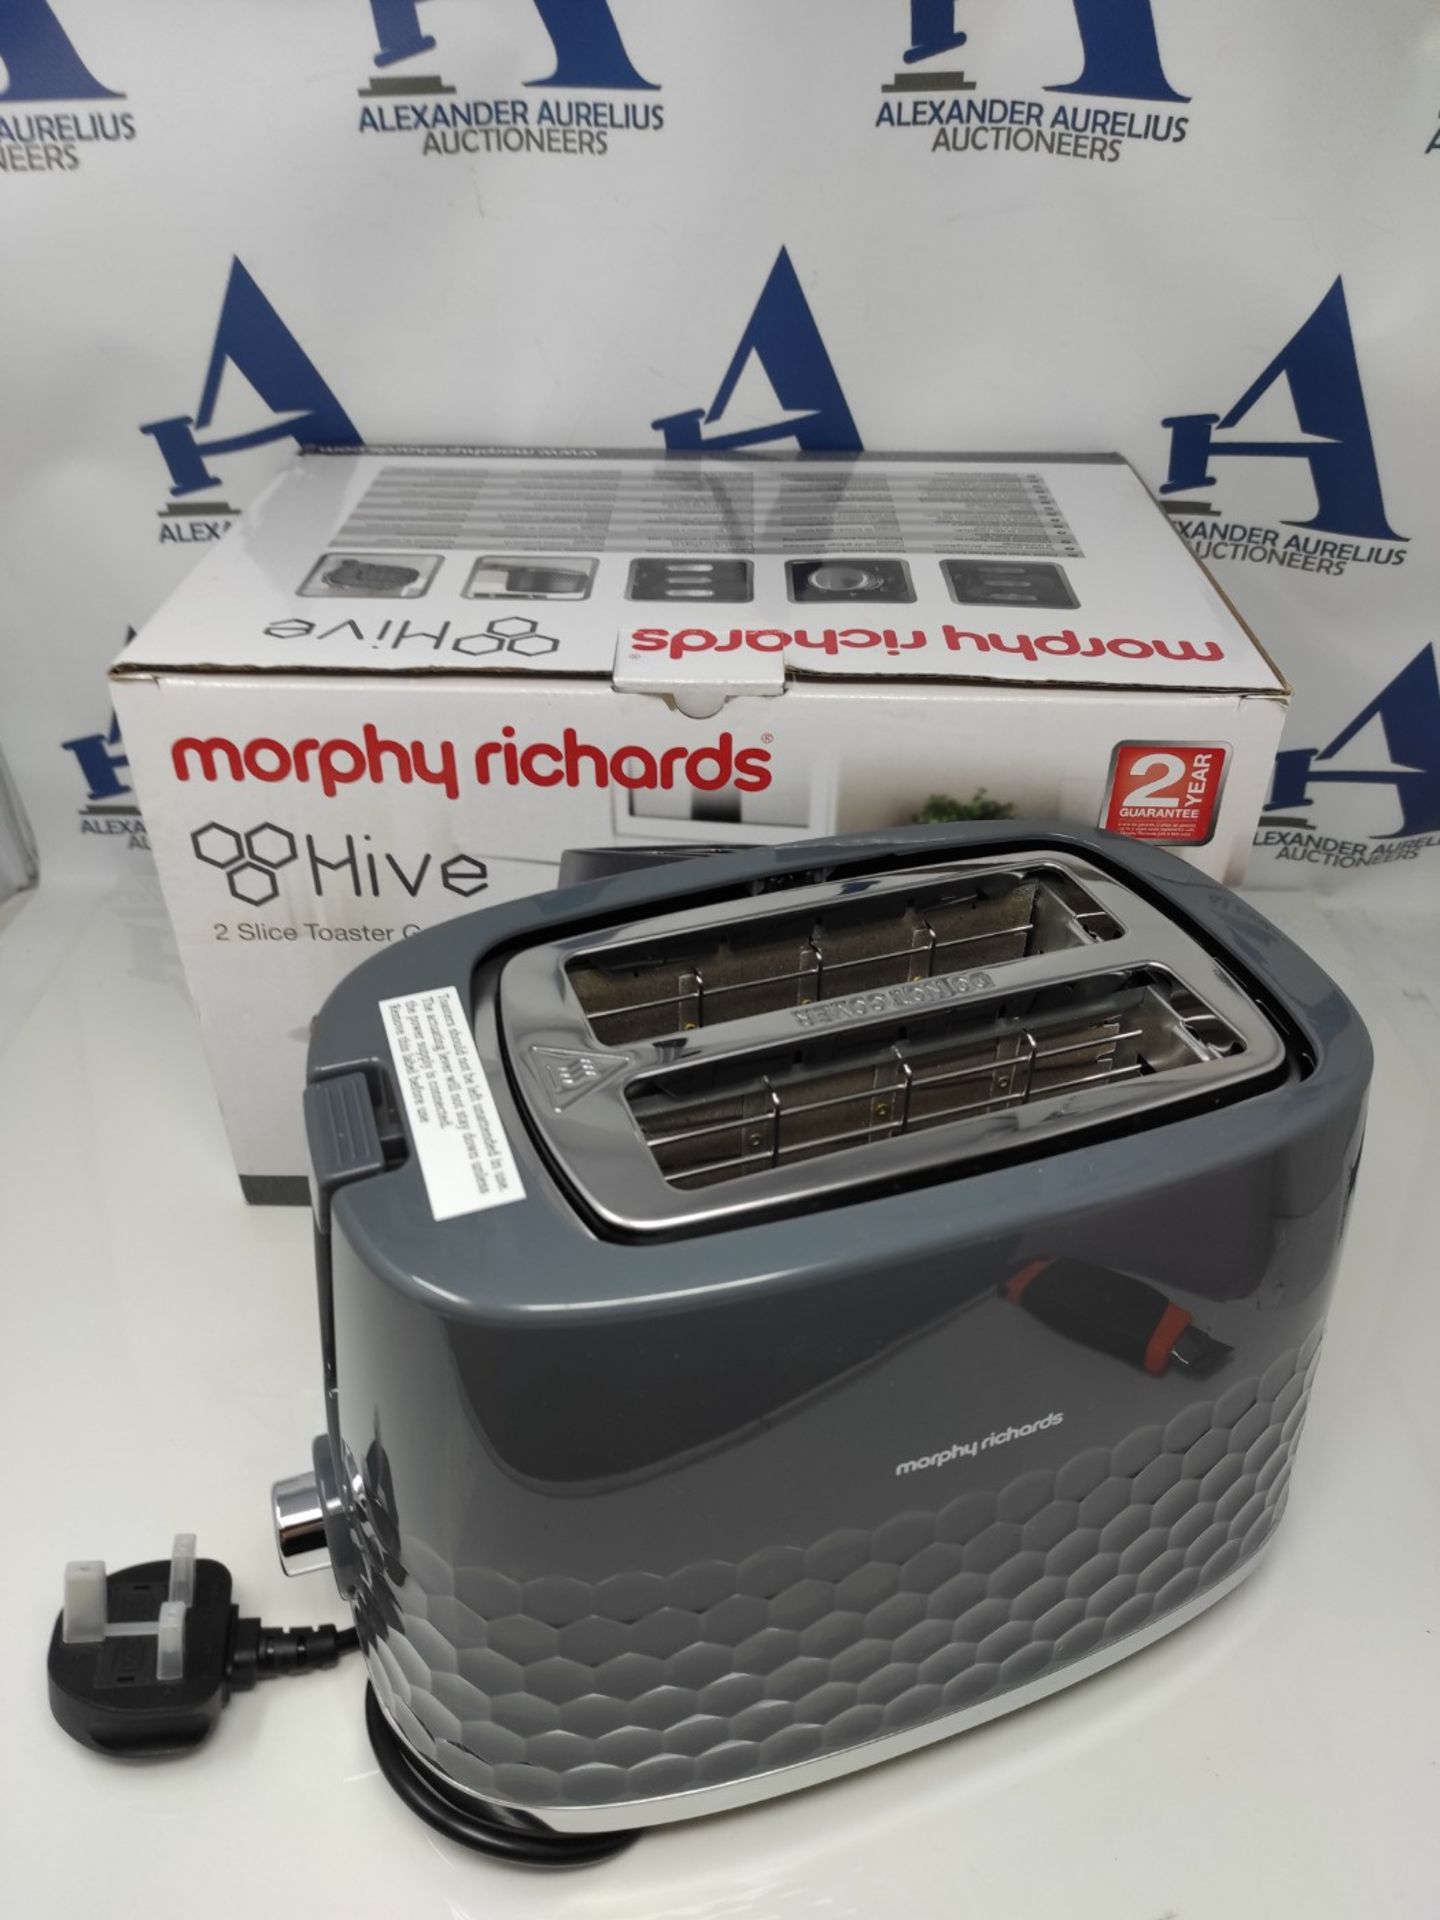 Morphy Richards 220033 Hive Toaster Grey - Image 2 of 2